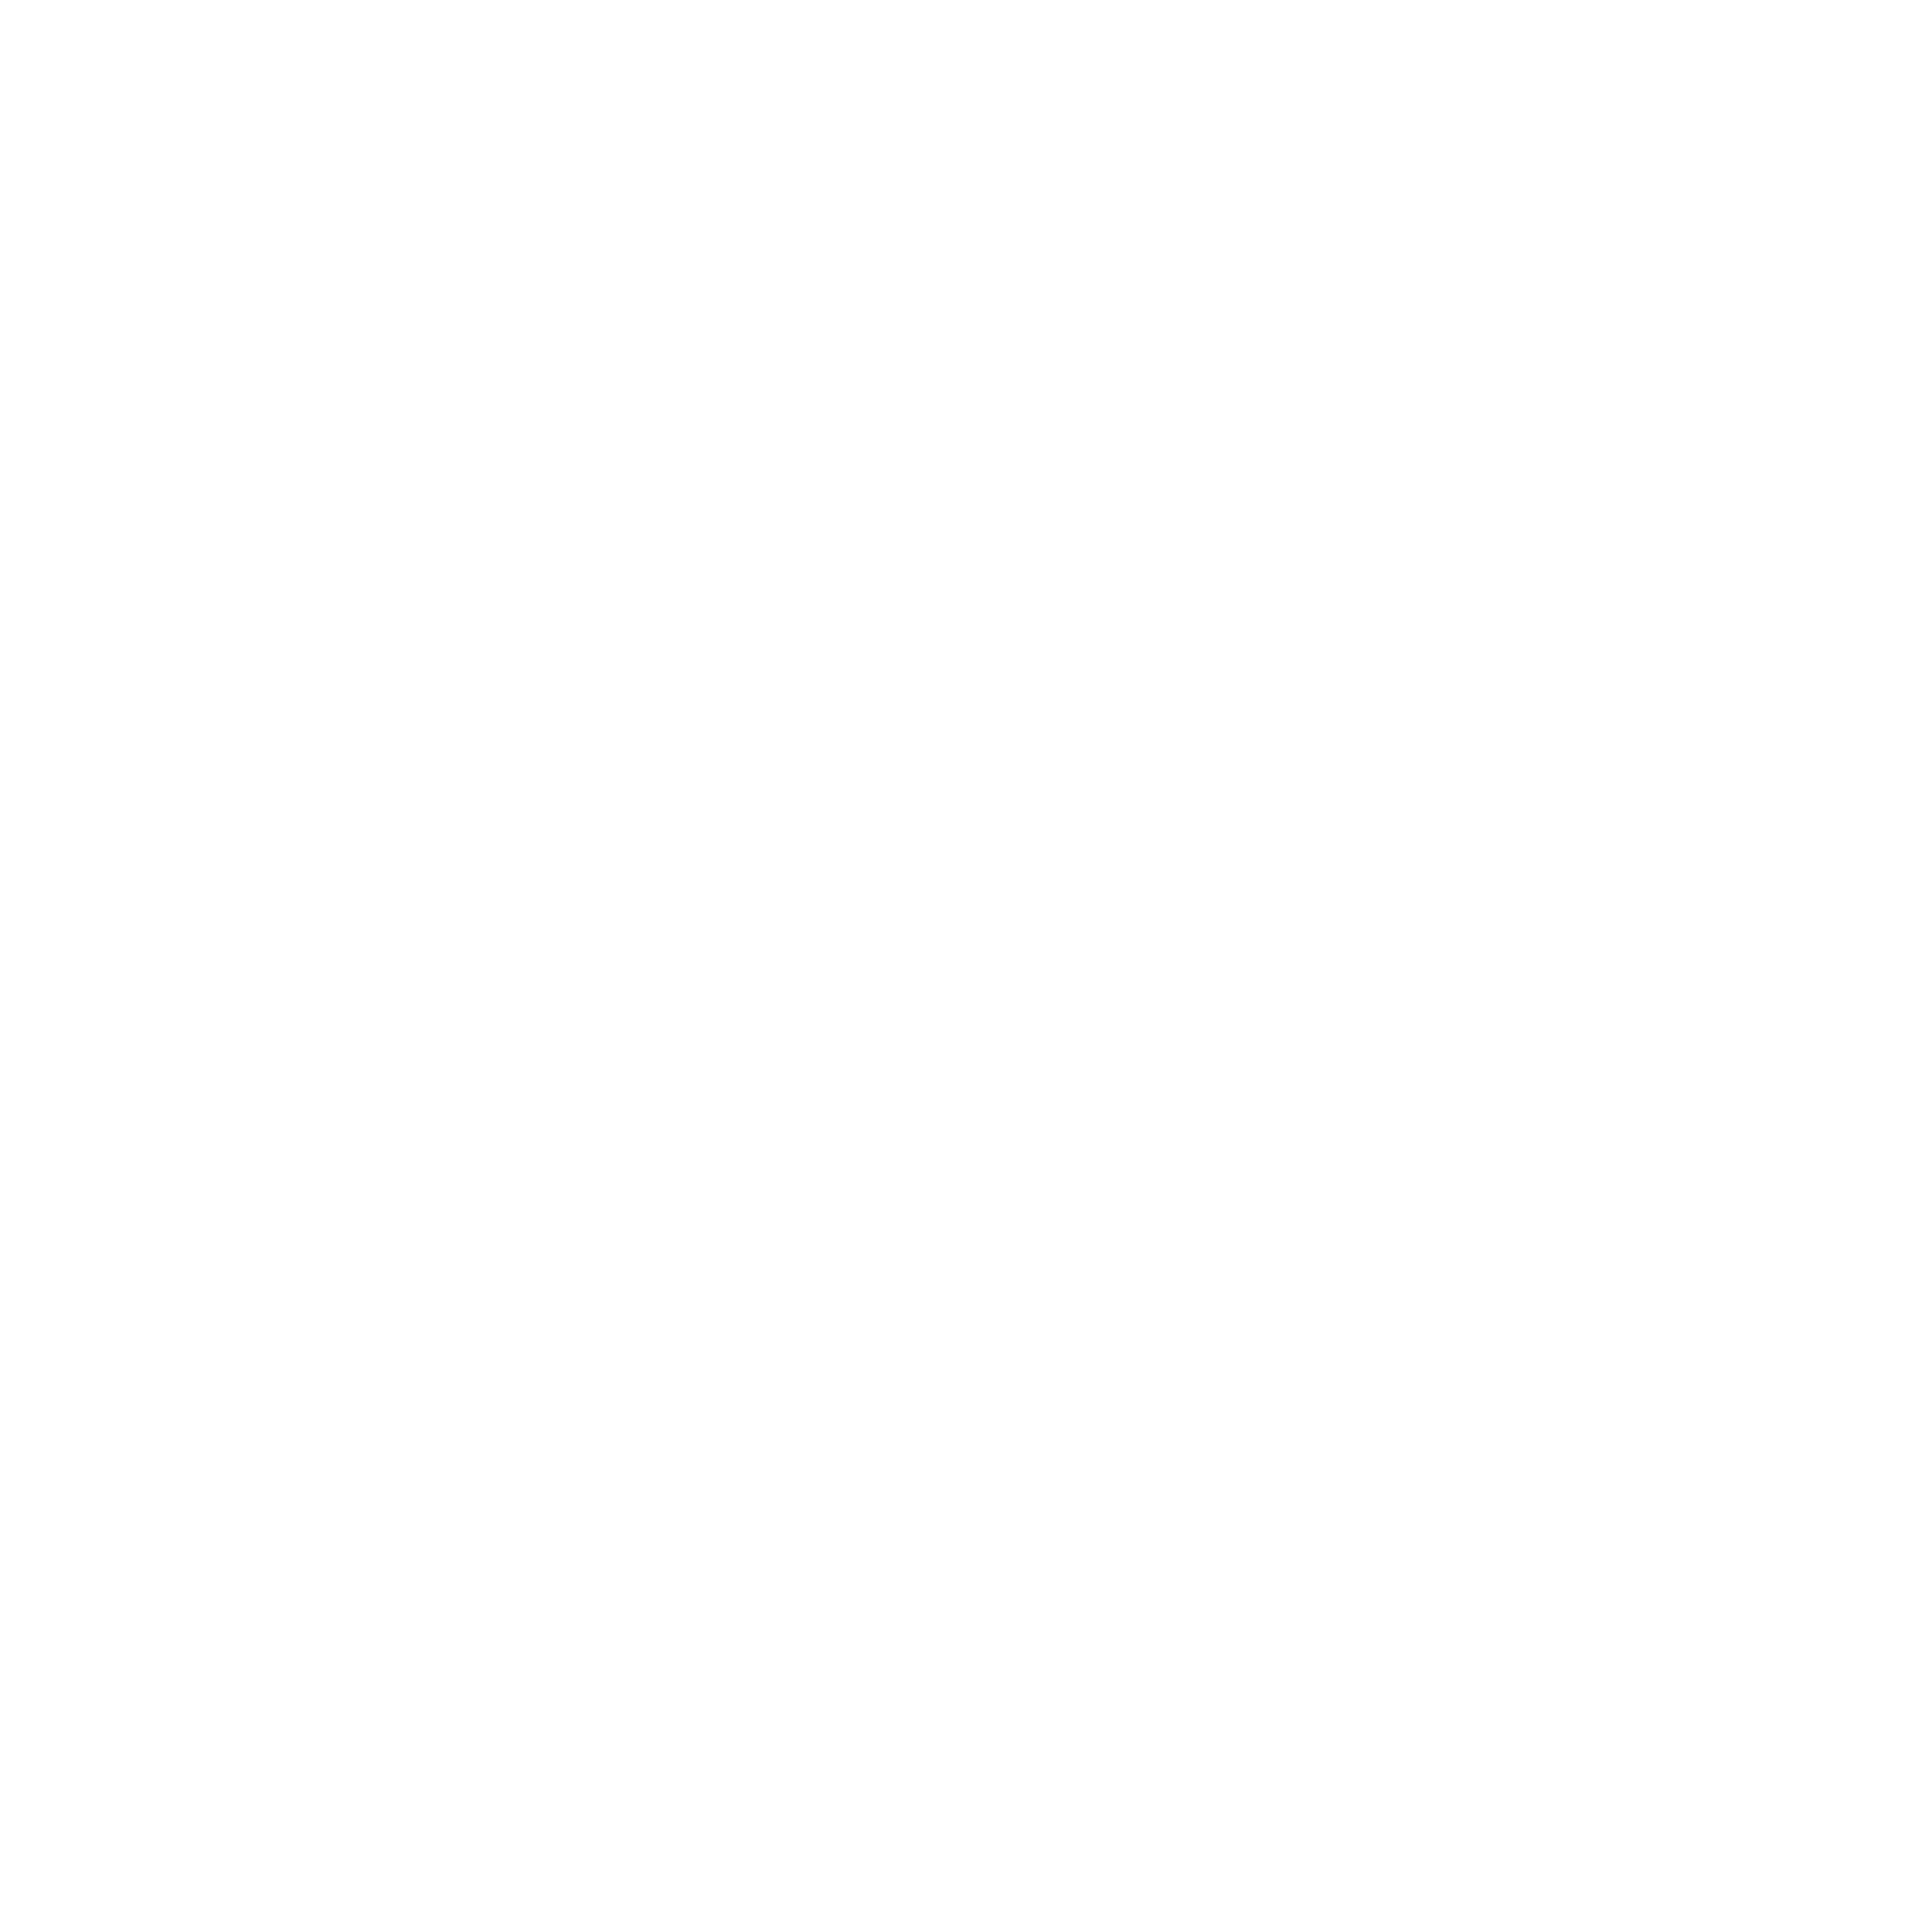 MAINSTREET REALTY GROUP